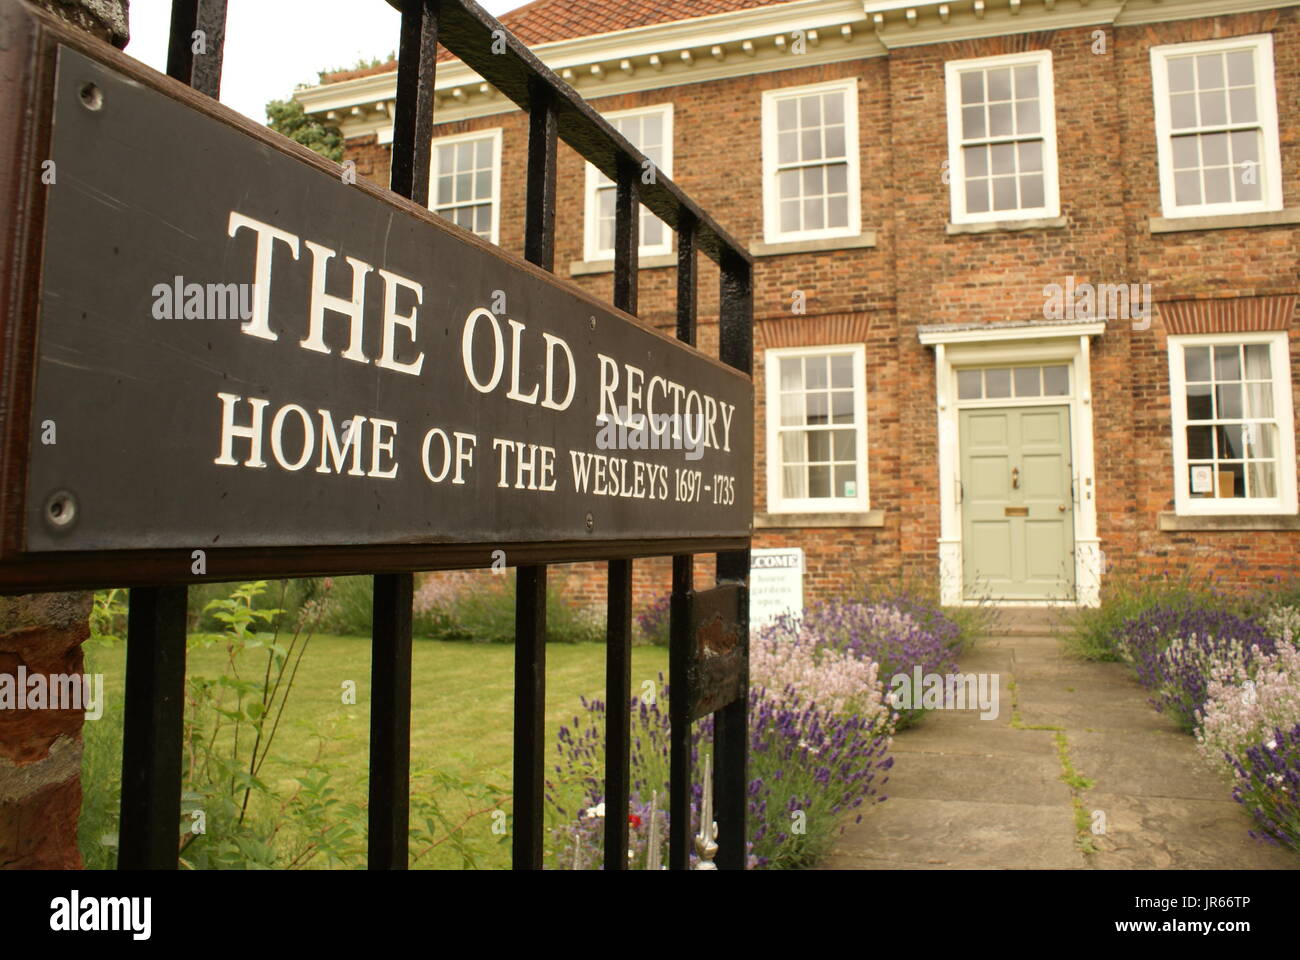 Old Rectory, Epworth, Lincolnshire Stockfoto